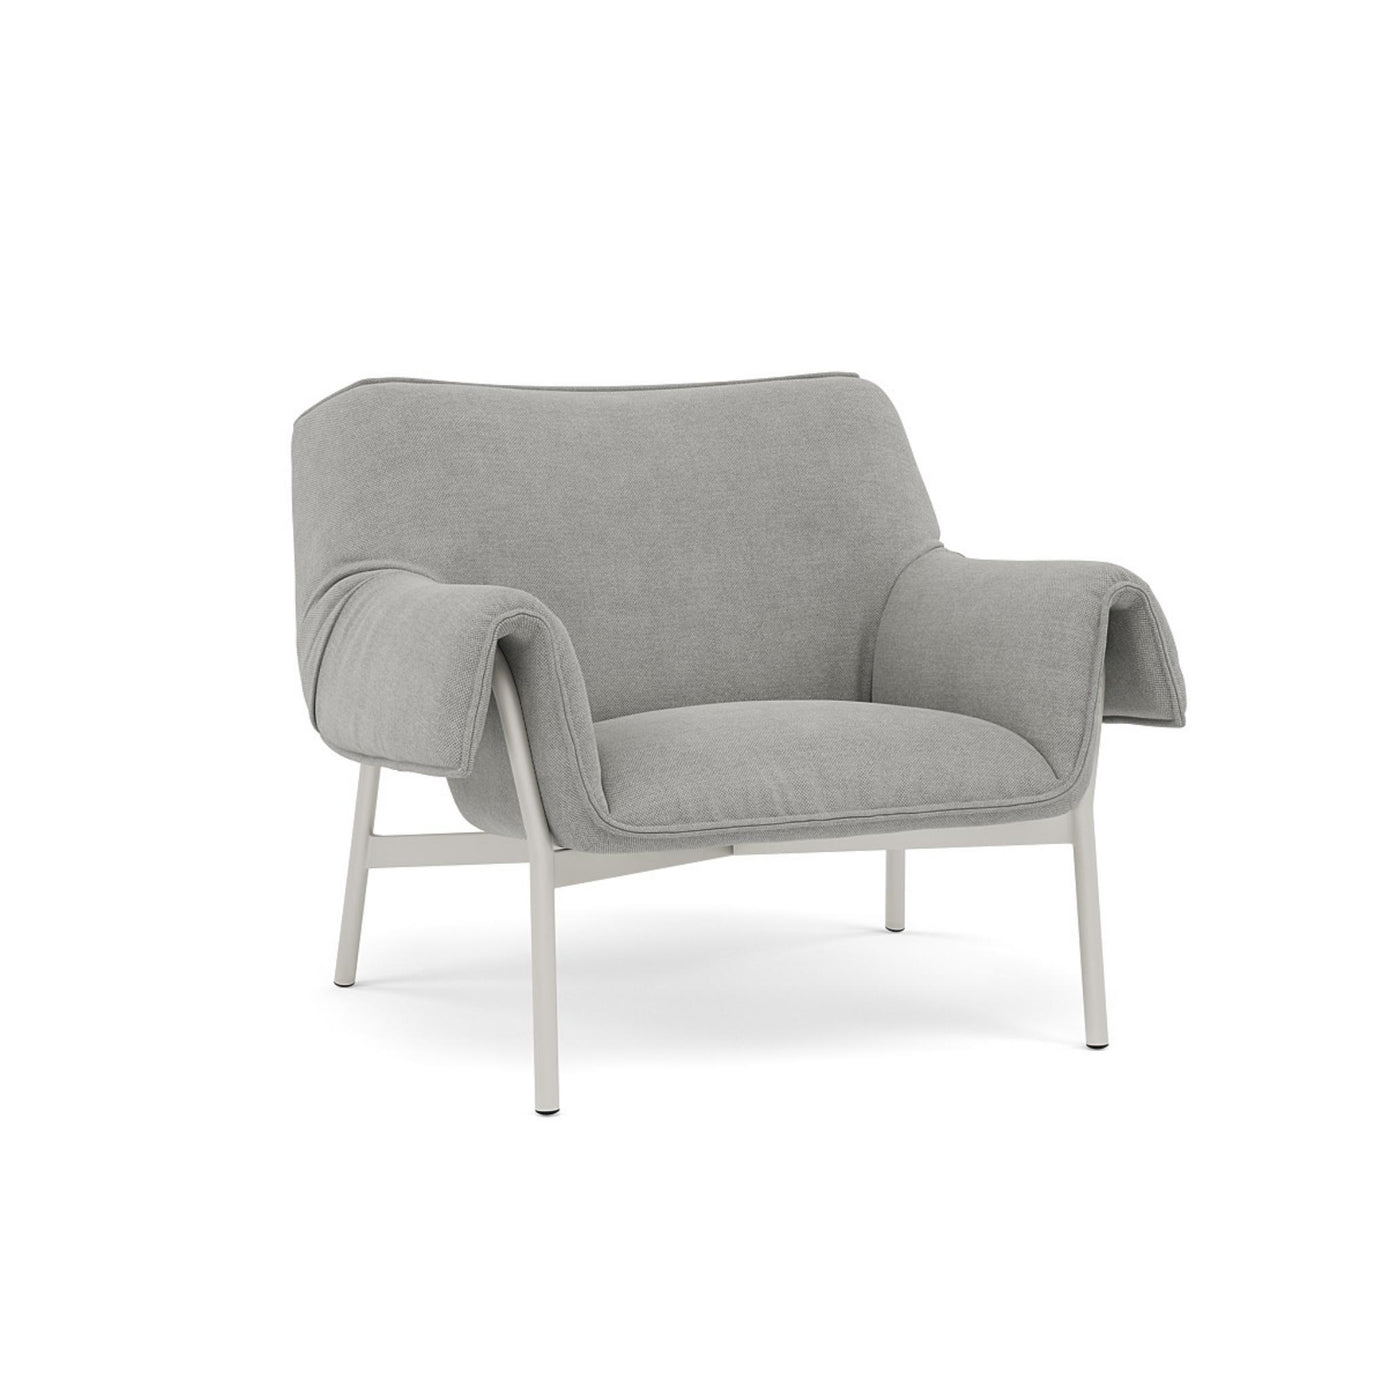 Muuto Wrap Lounge Chair. Made to order from someday designs. #colour_fiord-151